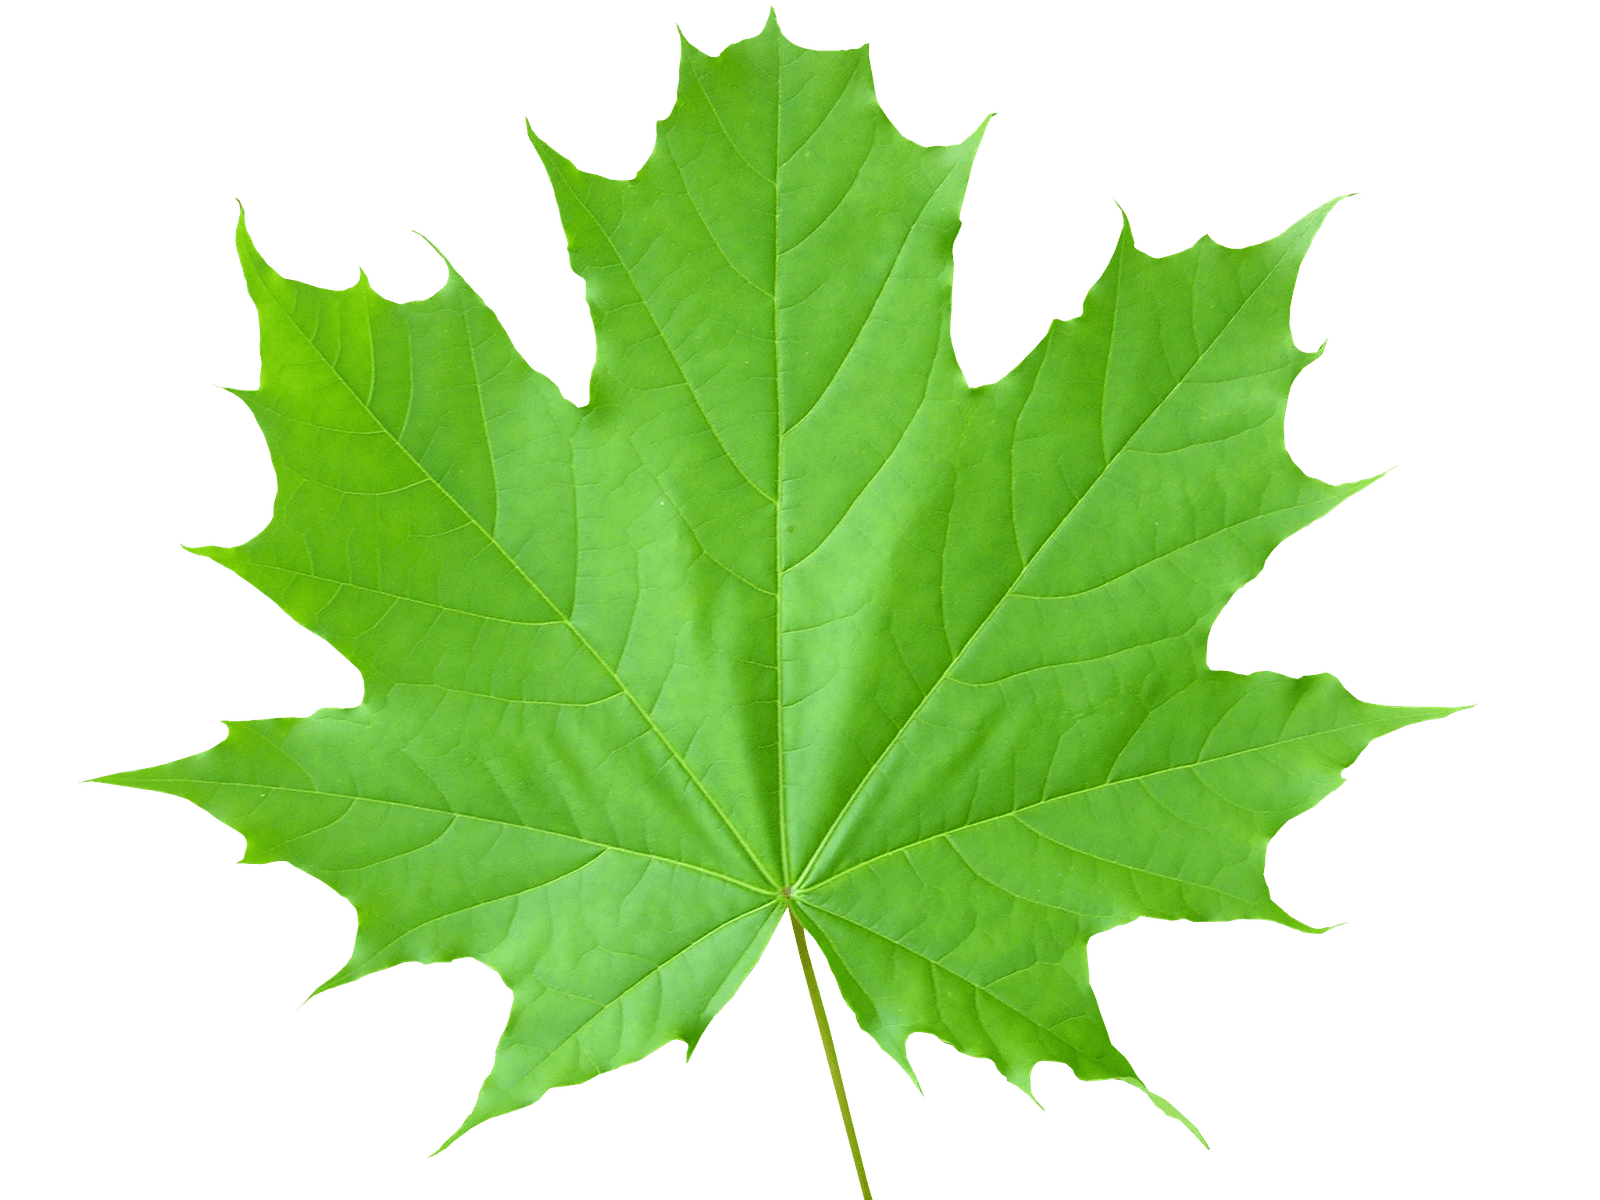 Autumn Sycamore Leaf Background PNG Image